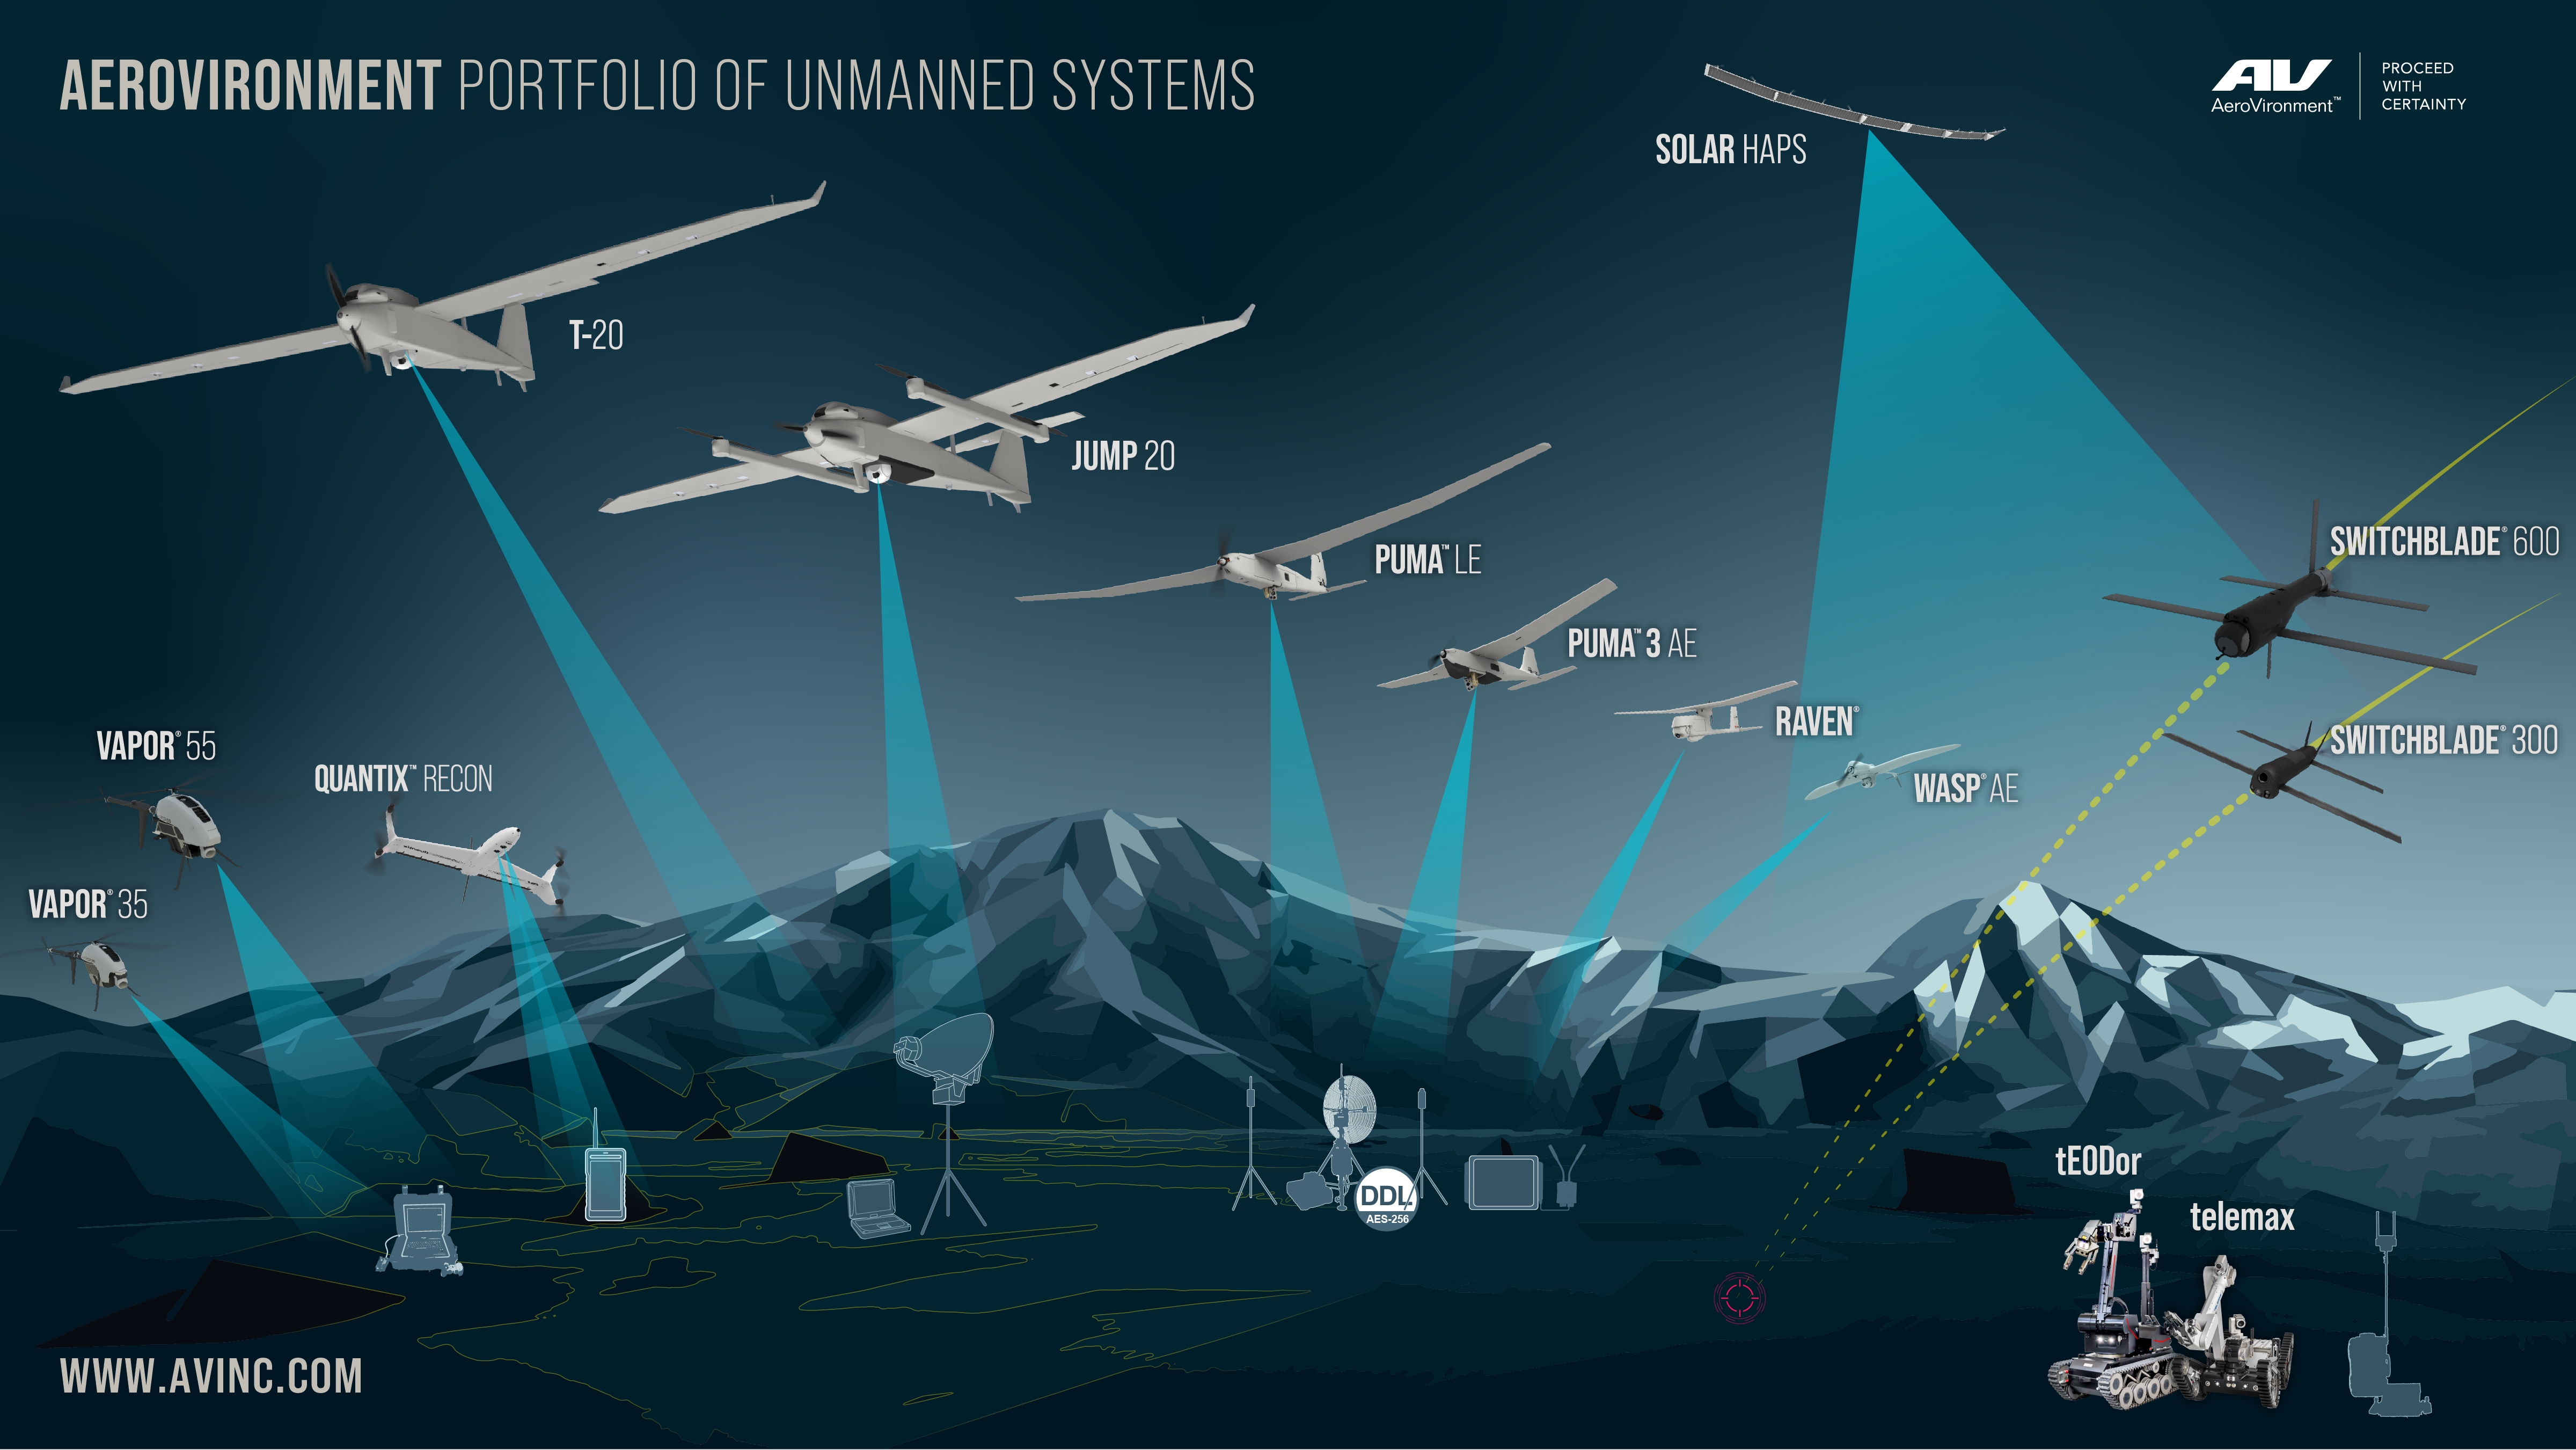 Product Segments into 3 and 2 Business to Arcturus Acquire AeroVironment Expanding Portfolio and UAV, | Group Systems Unmanned Reach Aircraft Wire